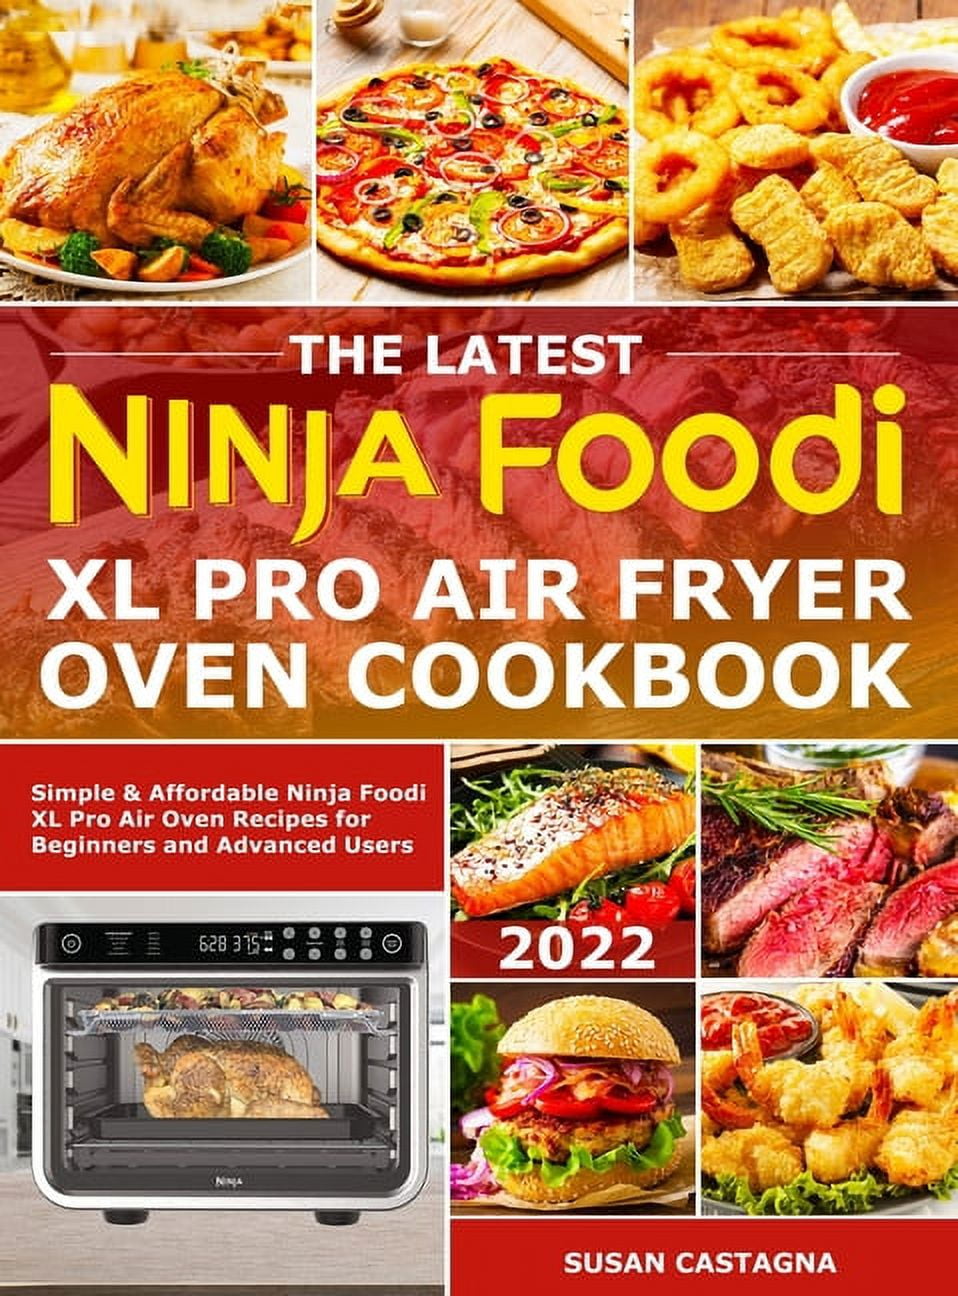 The Big Ninja Foodi XL Pro Air Fryer Oven Cookbook: 1000 Days Easy &  Affordable Bake, Air Fry, Toast, and Much More Recipes for Beginners and  Advanced Users: Brickner, Robin: 9798488444270: 